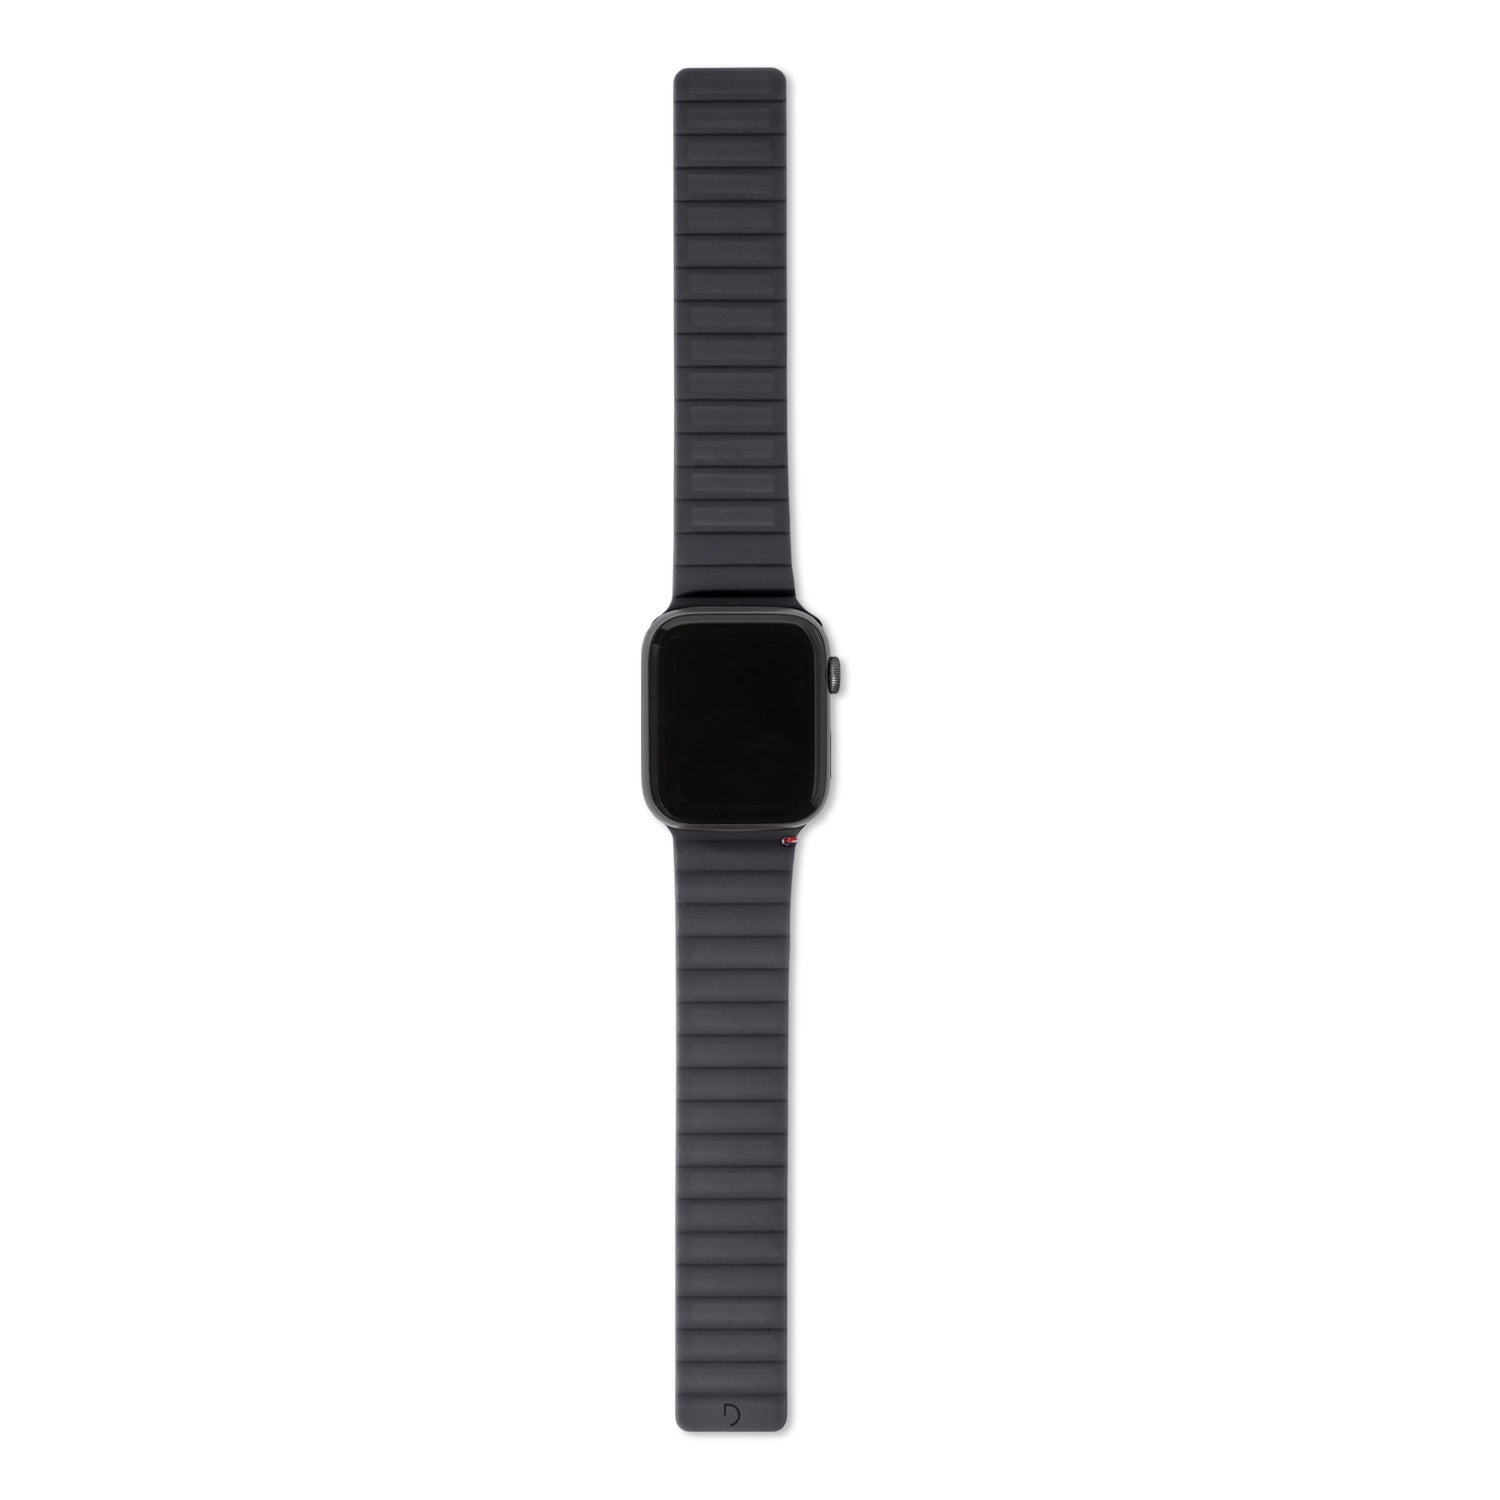 Silicone Magnetic Traction Strap Lite Apple Watch 42mm Charcoal